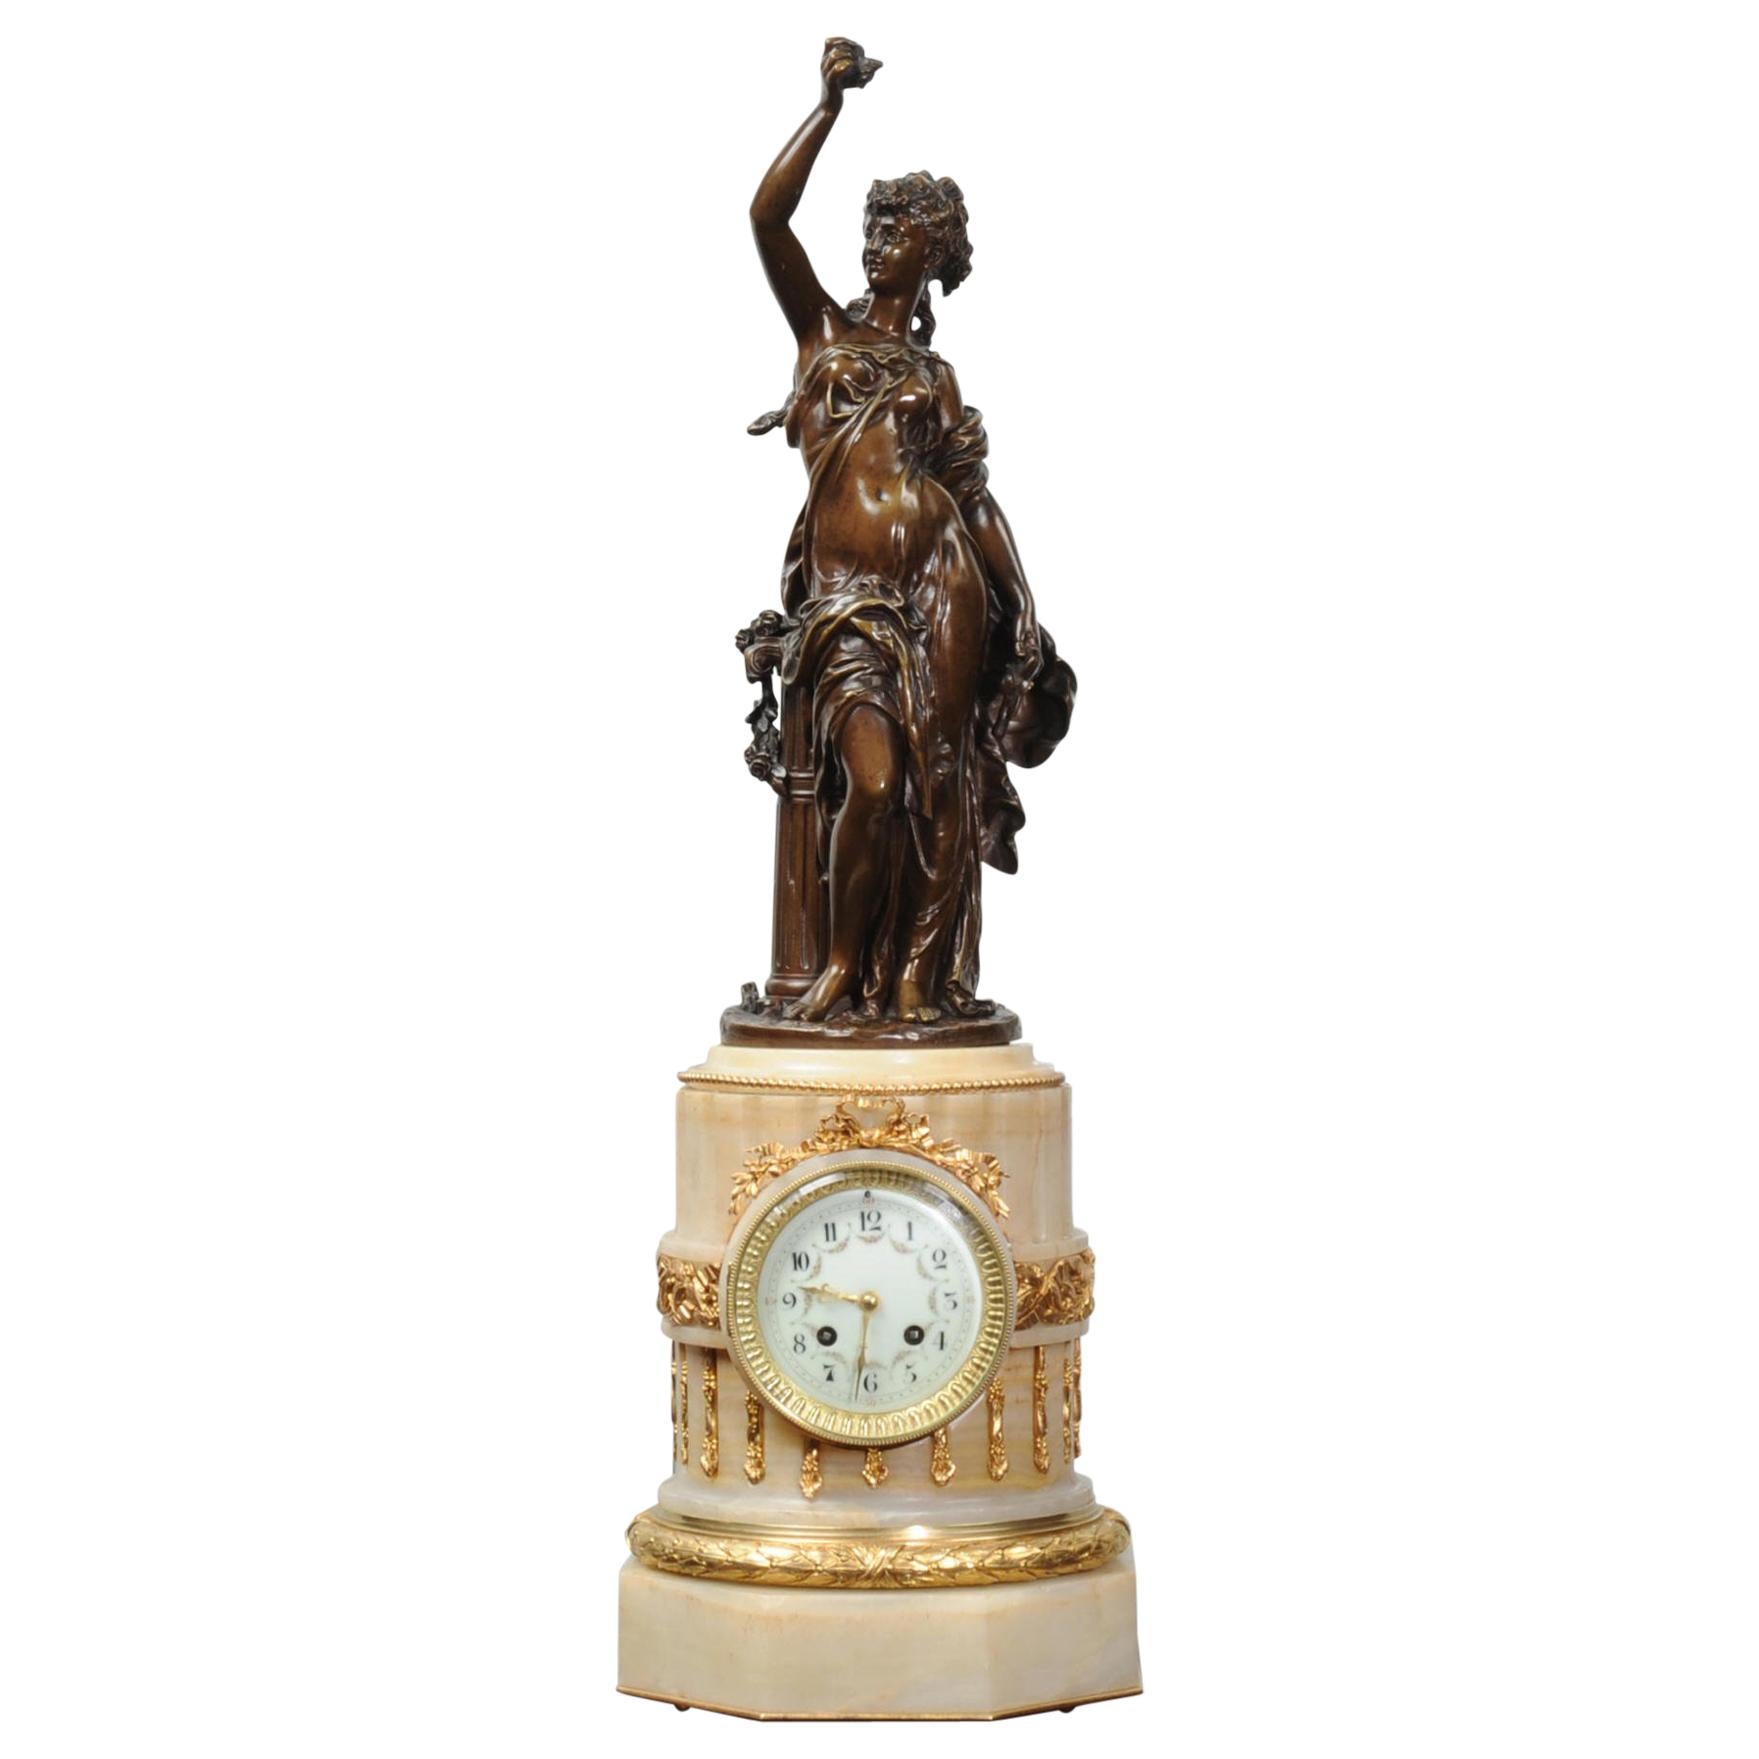 Antique French Onyx and Bronze Clock by Moreau and Japy Freres